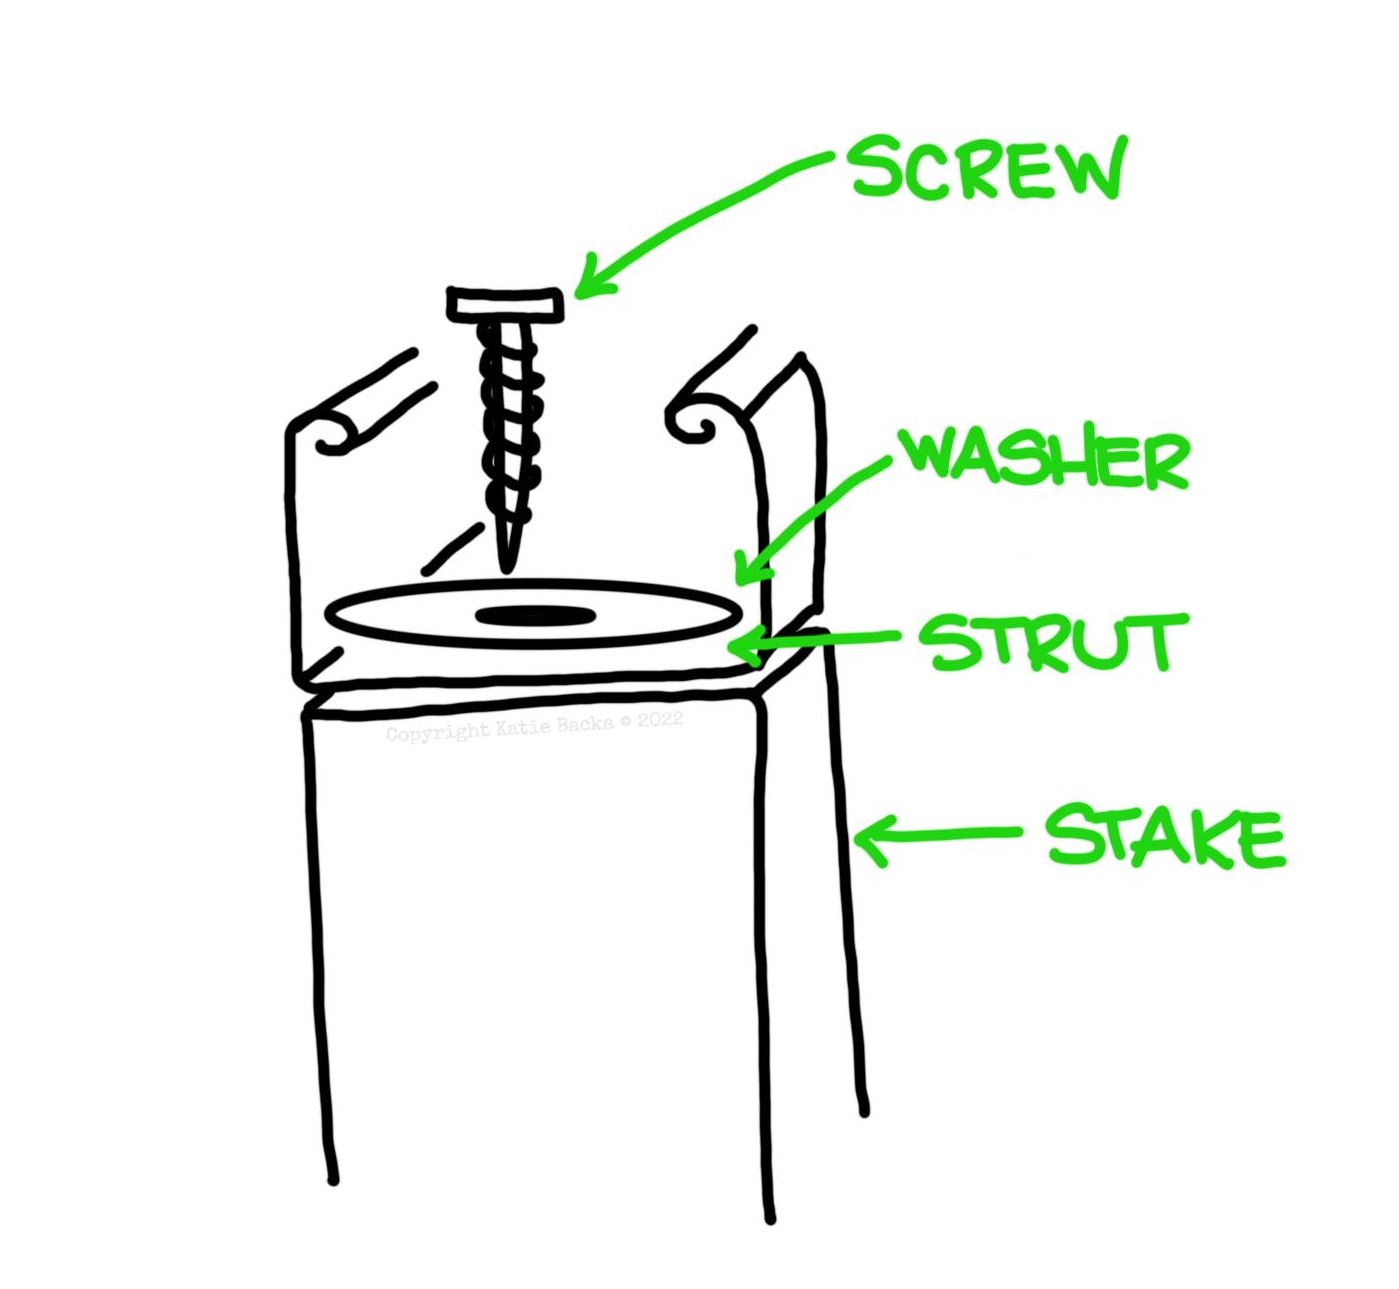 Hand-drawn diagram of a screw going into a washer on a strut being attached to a wooden stake